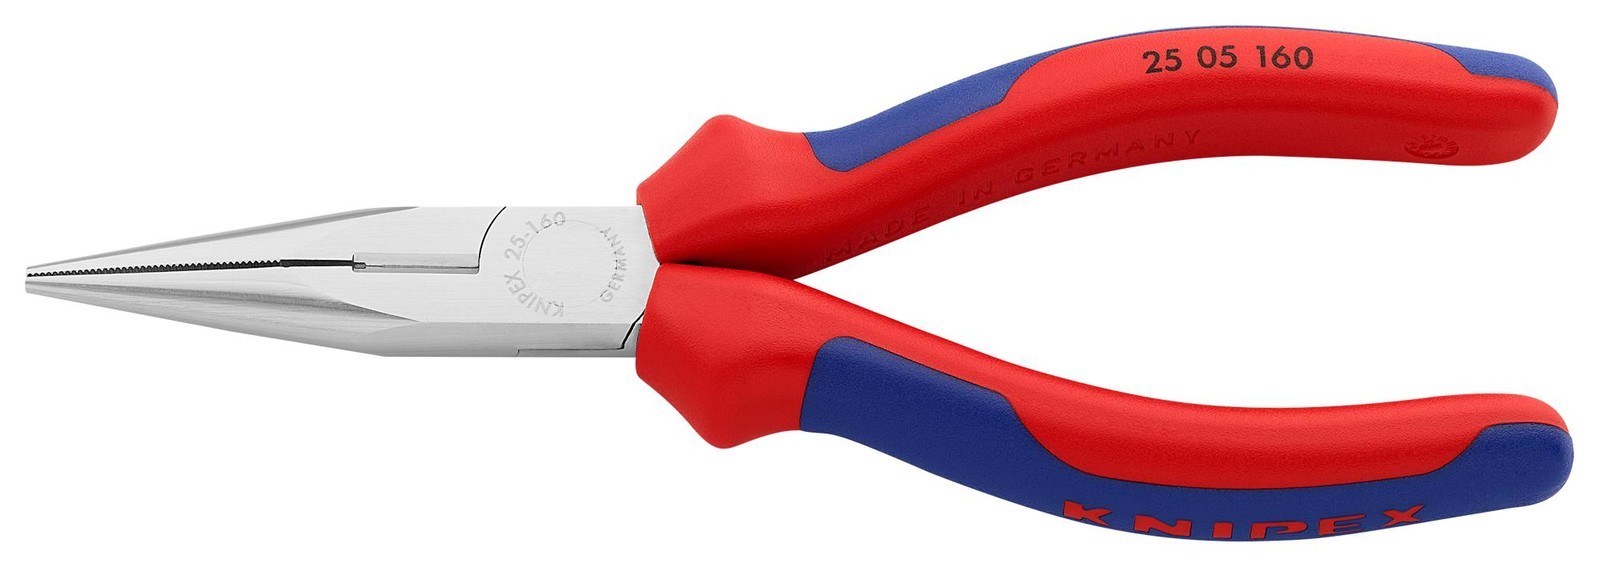 Knipex 25 05 160 Combination Plier, 160mm